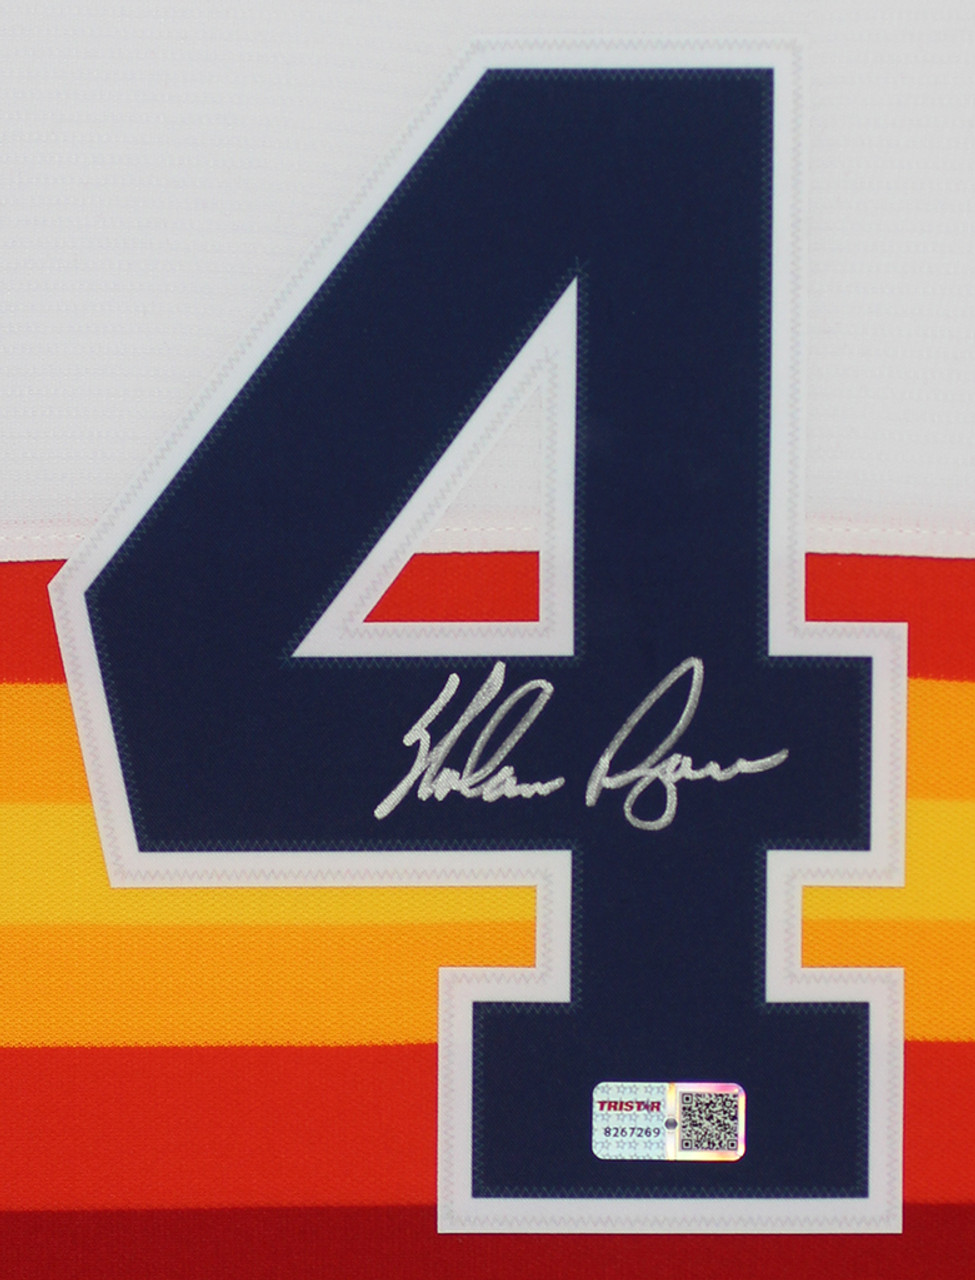 Nolan Ryan Autographed Houston Astros Rainbow Cooperstown Collection Jersey  TRISTAR